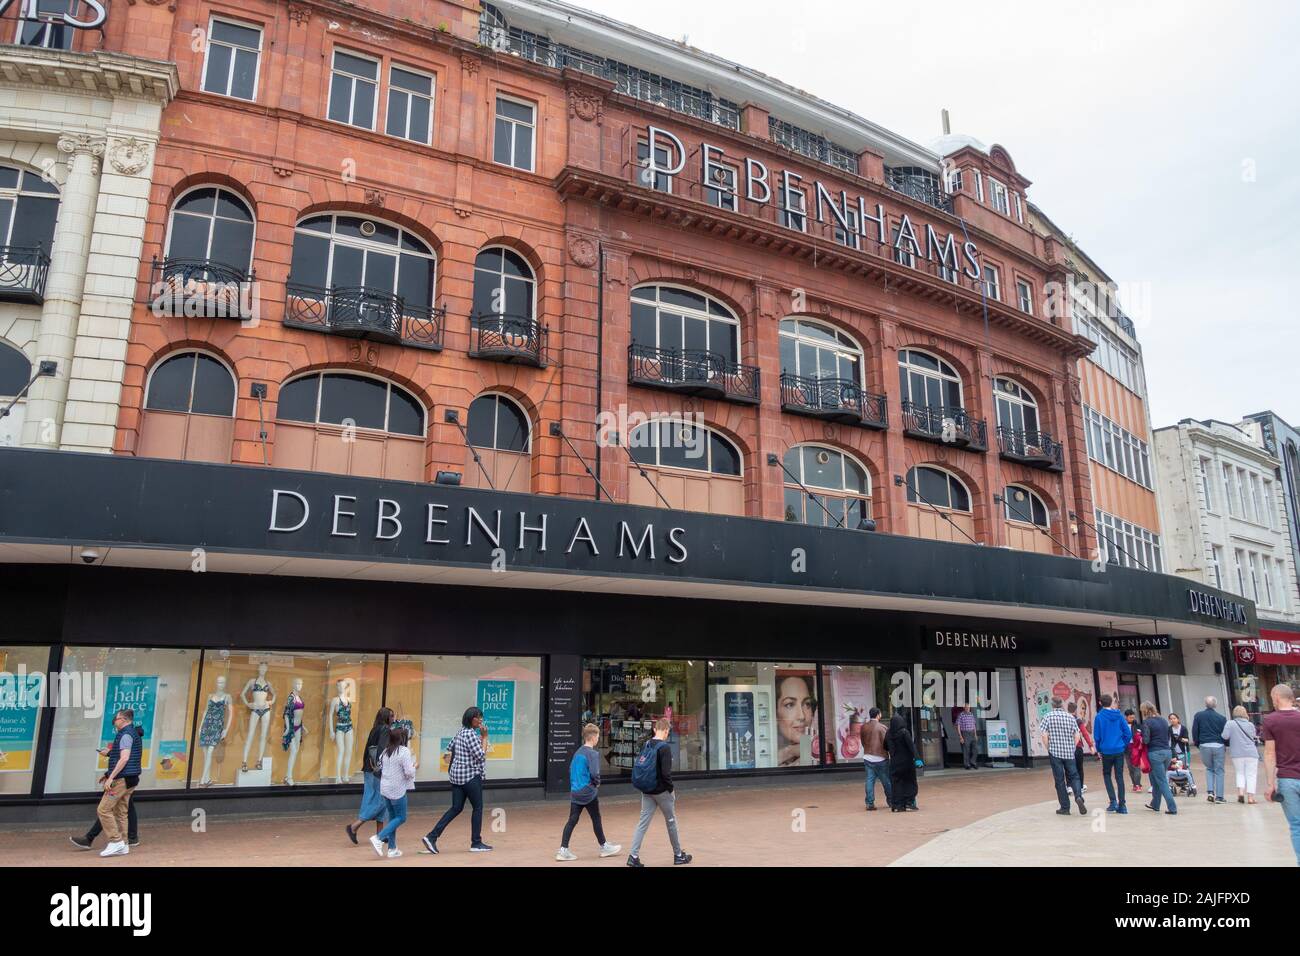 Debenhams store, The Square, Bourne Ave, Bournemouth BH2 5LY. A total of 25,000 shop jobs are set to be axed after the collapse of the Arcadia group of stores and the end of a rescue bid for Debenhams, early December 2020. Stock Photo